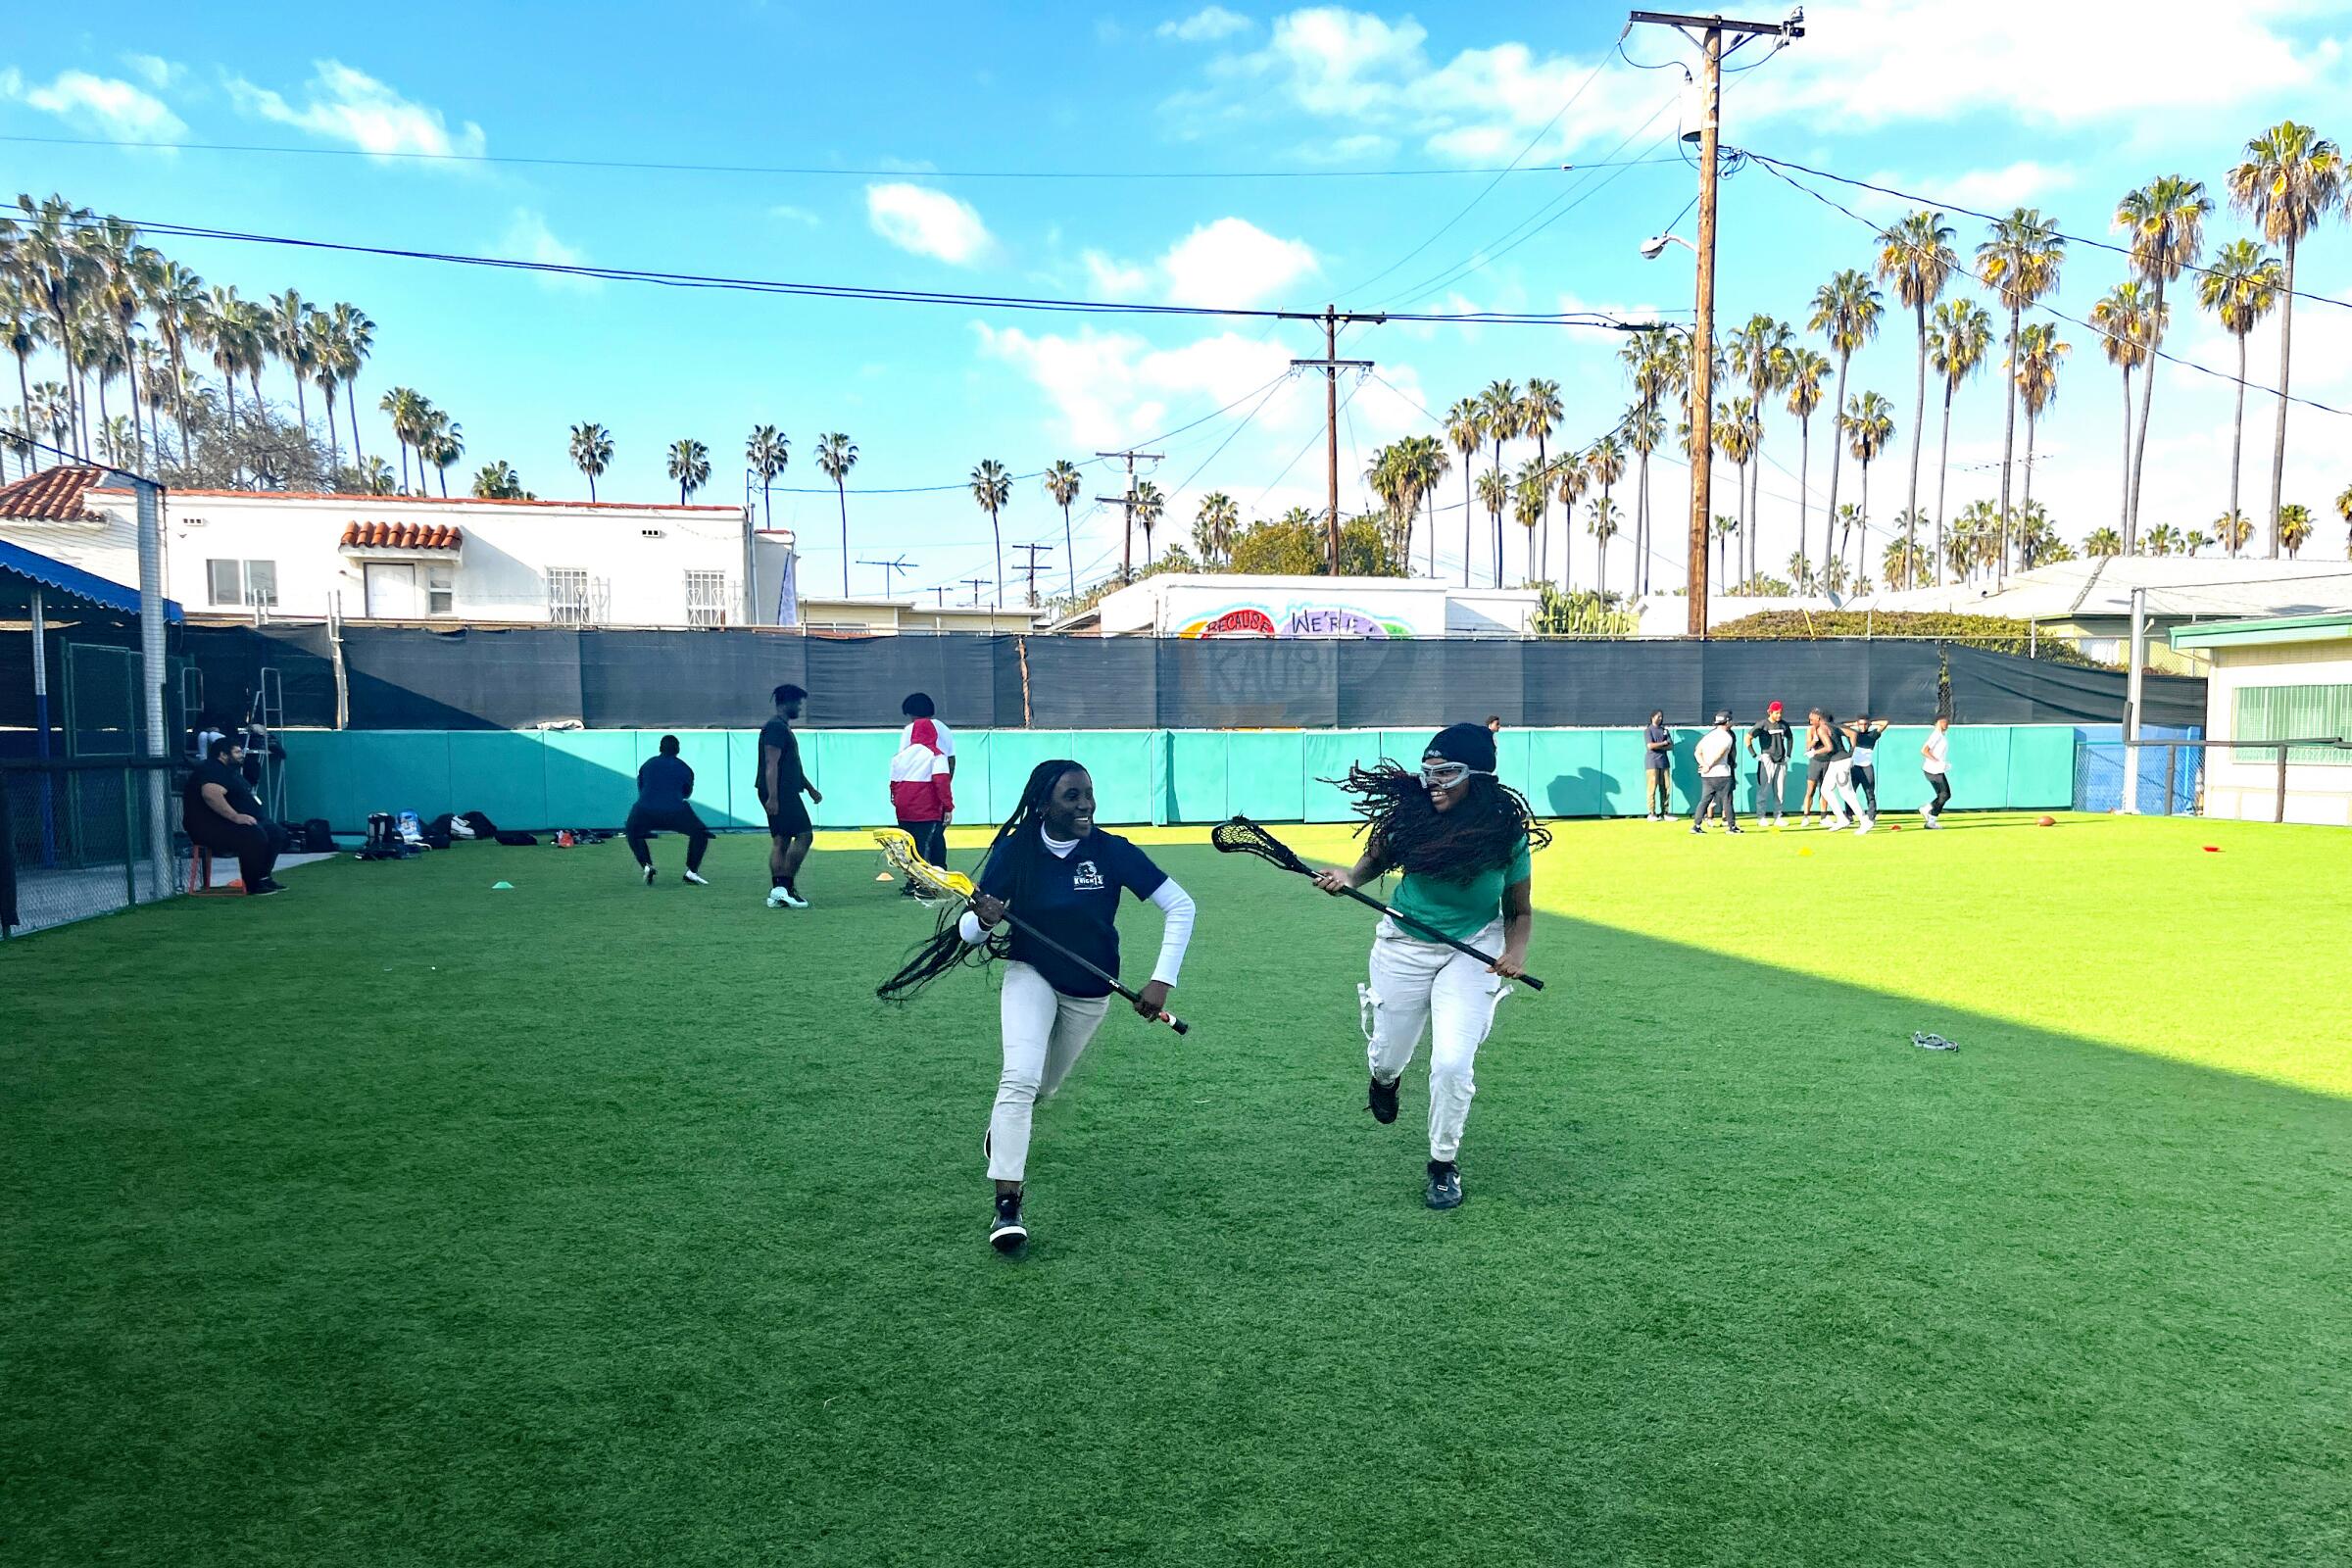 Girls' Generation roots for baseball players in LA